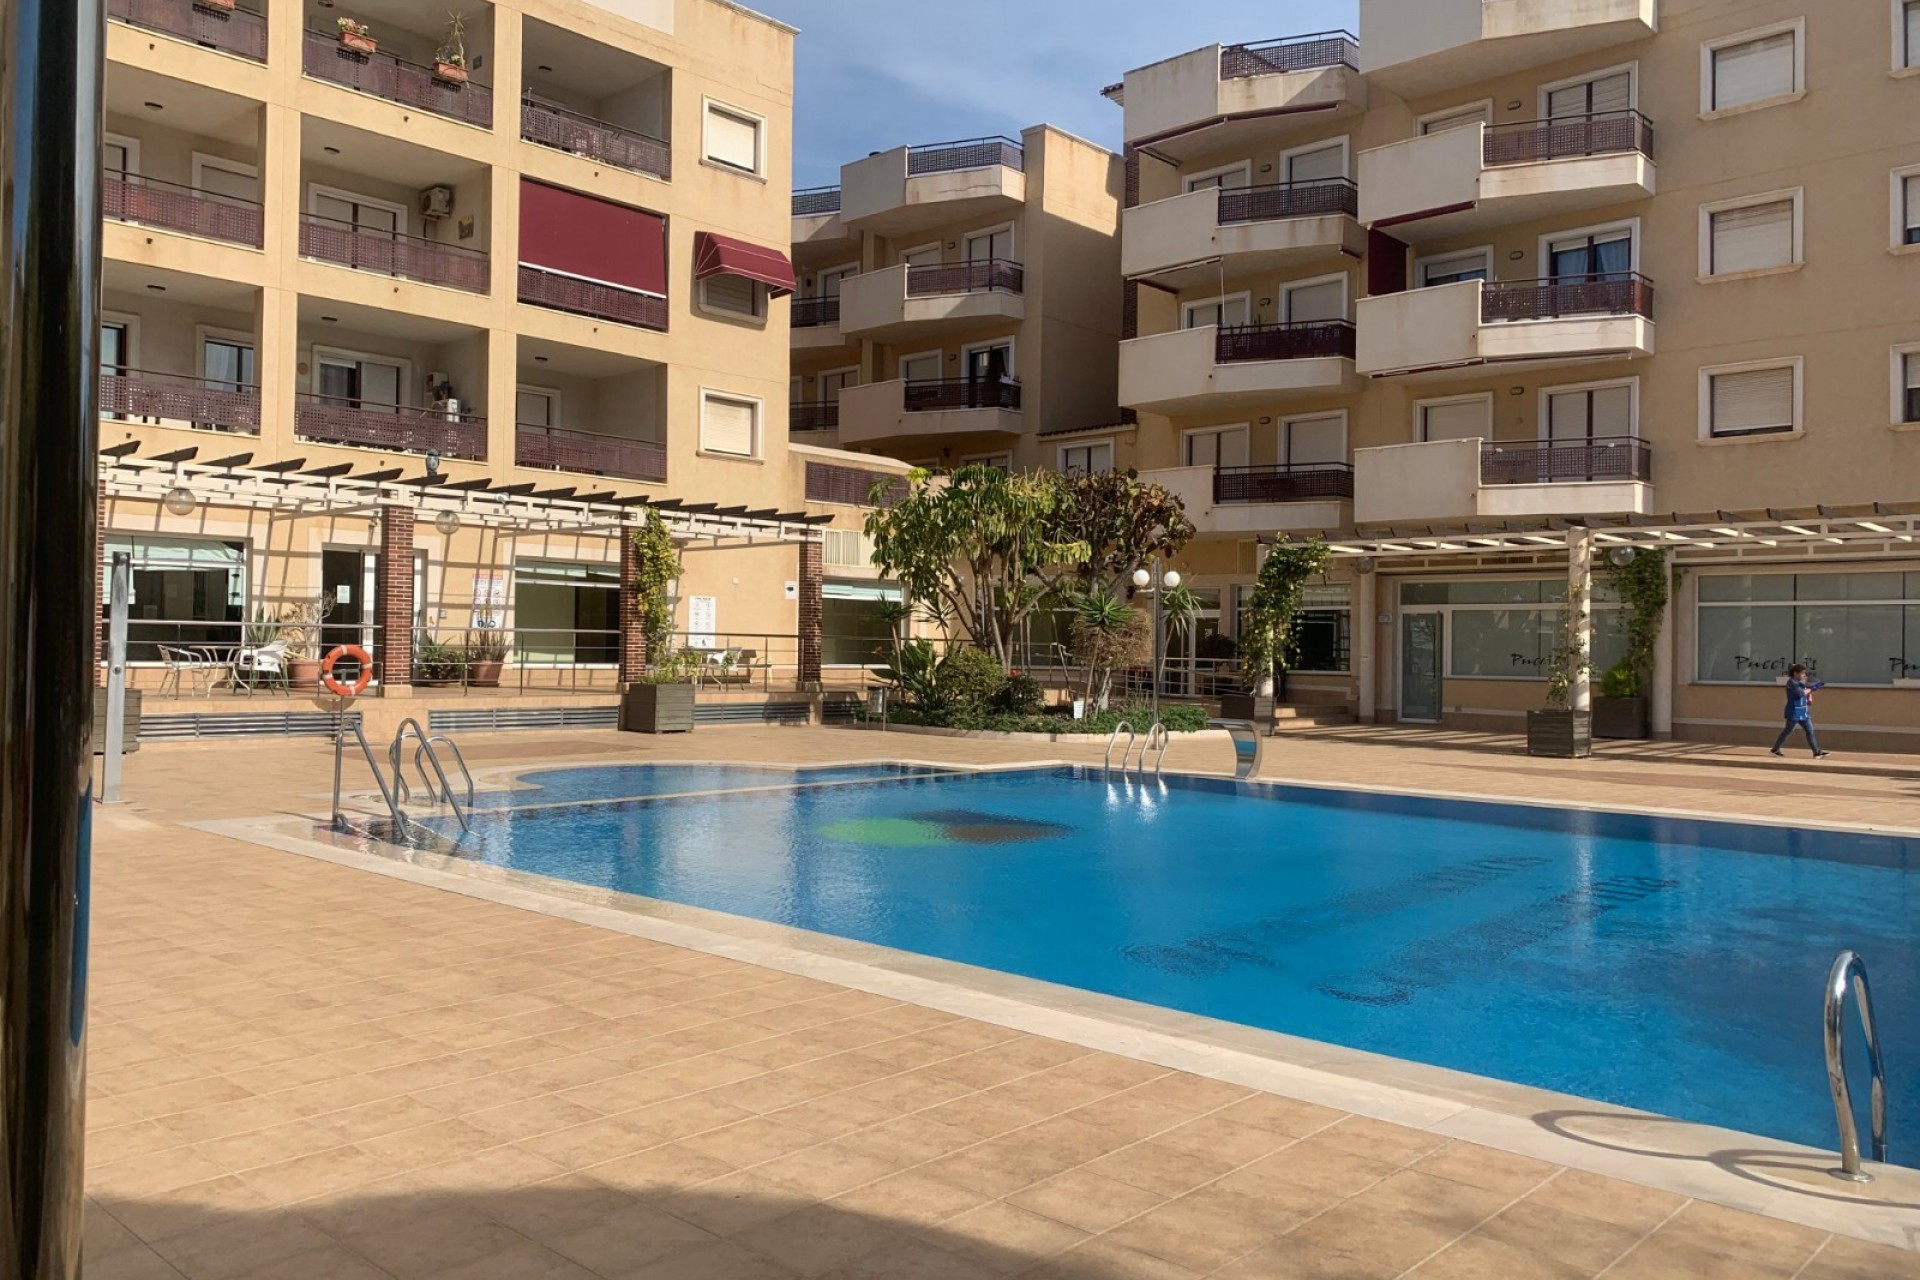 For sale: 2 bedroom apartment / flat in Cabo Roig, Costa Blanca